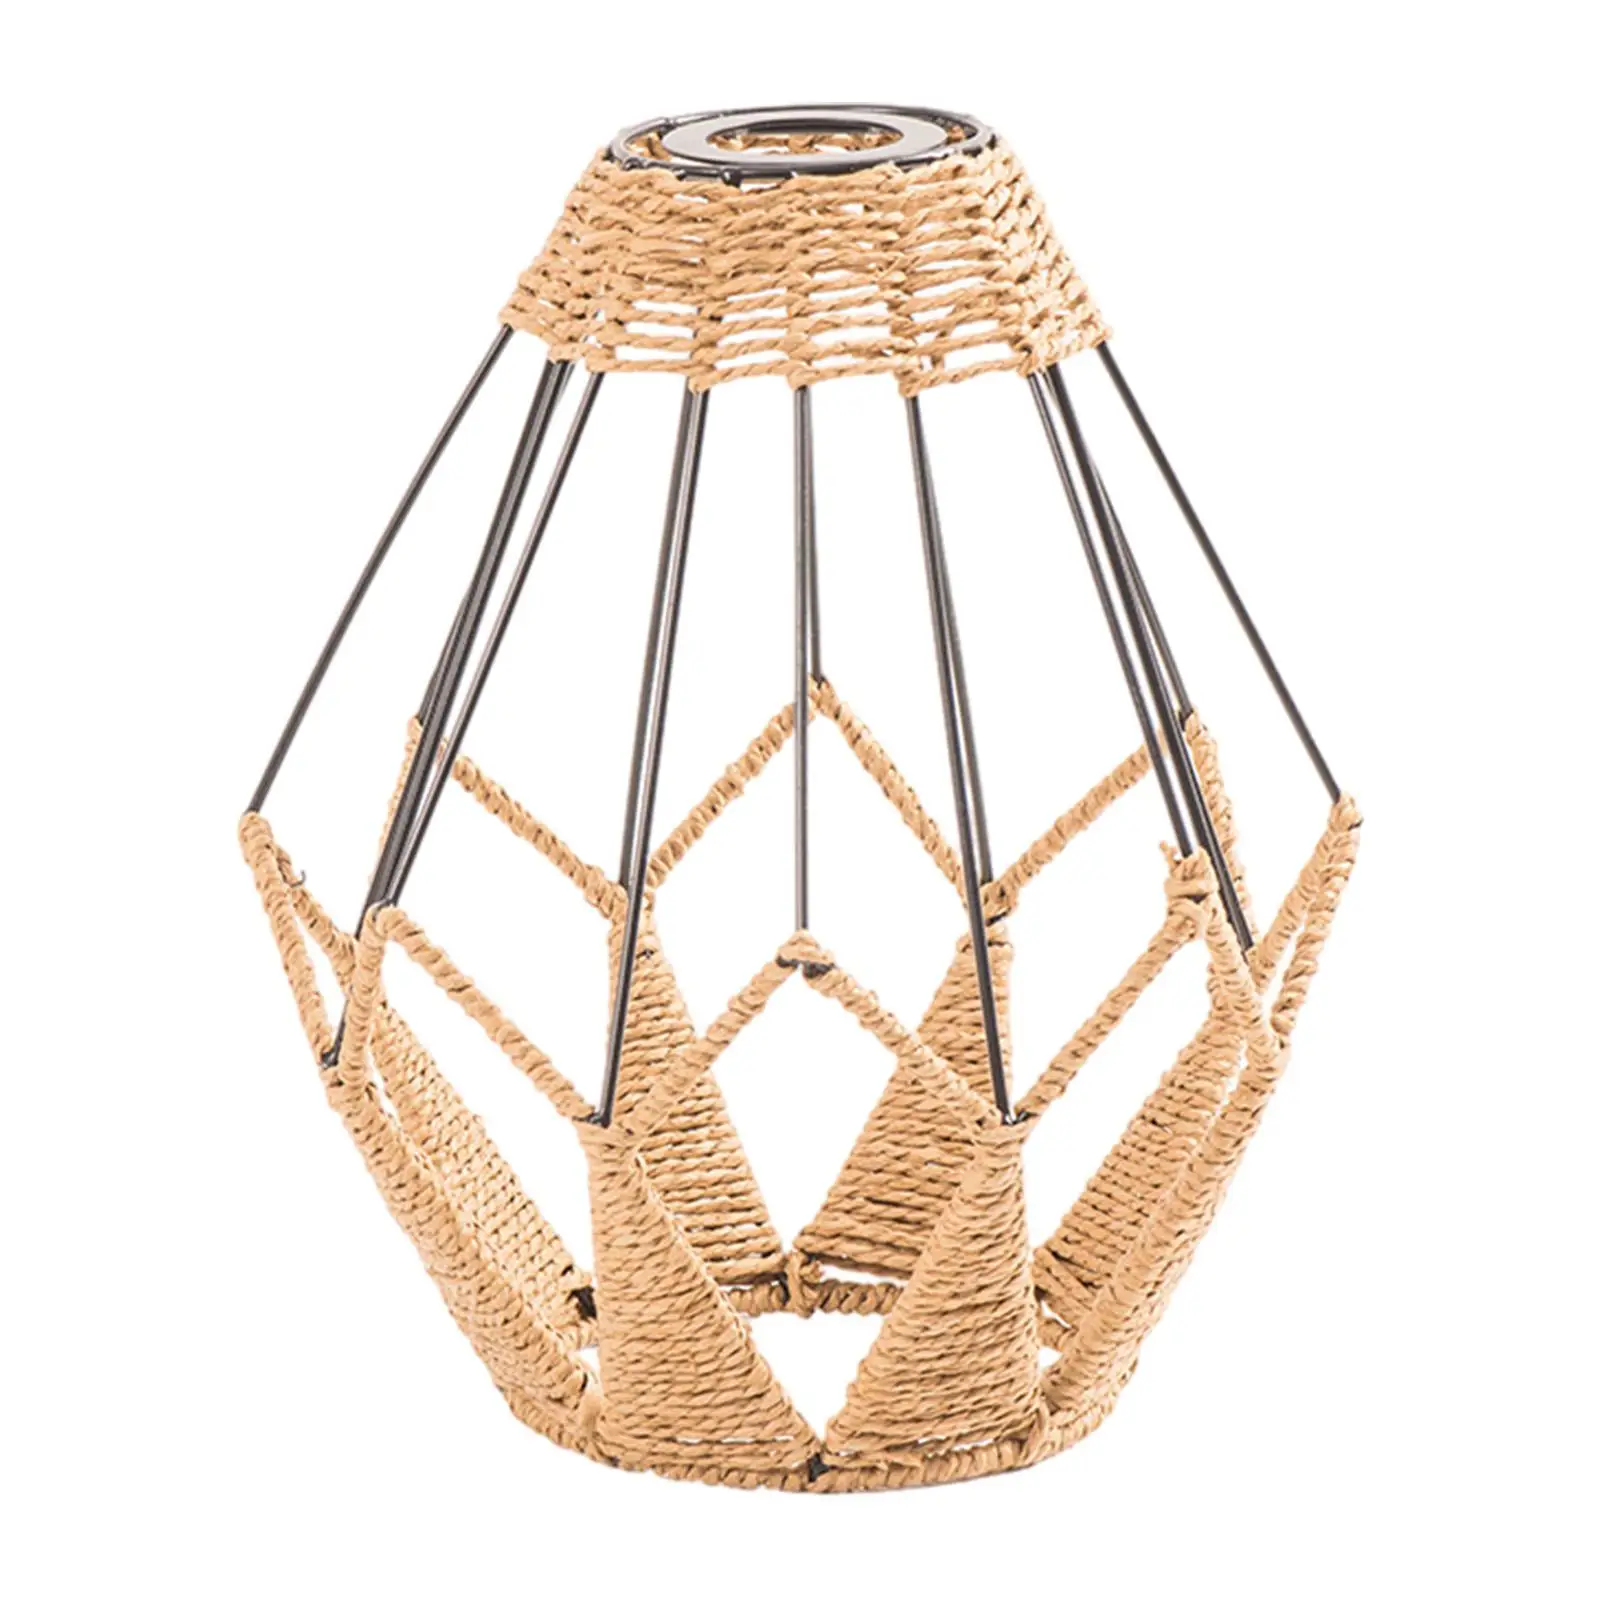 Light Shade Chandelier Cover Decoration Rustic Weave Rope Lampshade for Restaurant Hallway Kitchen Island Dining Room Farmhouse